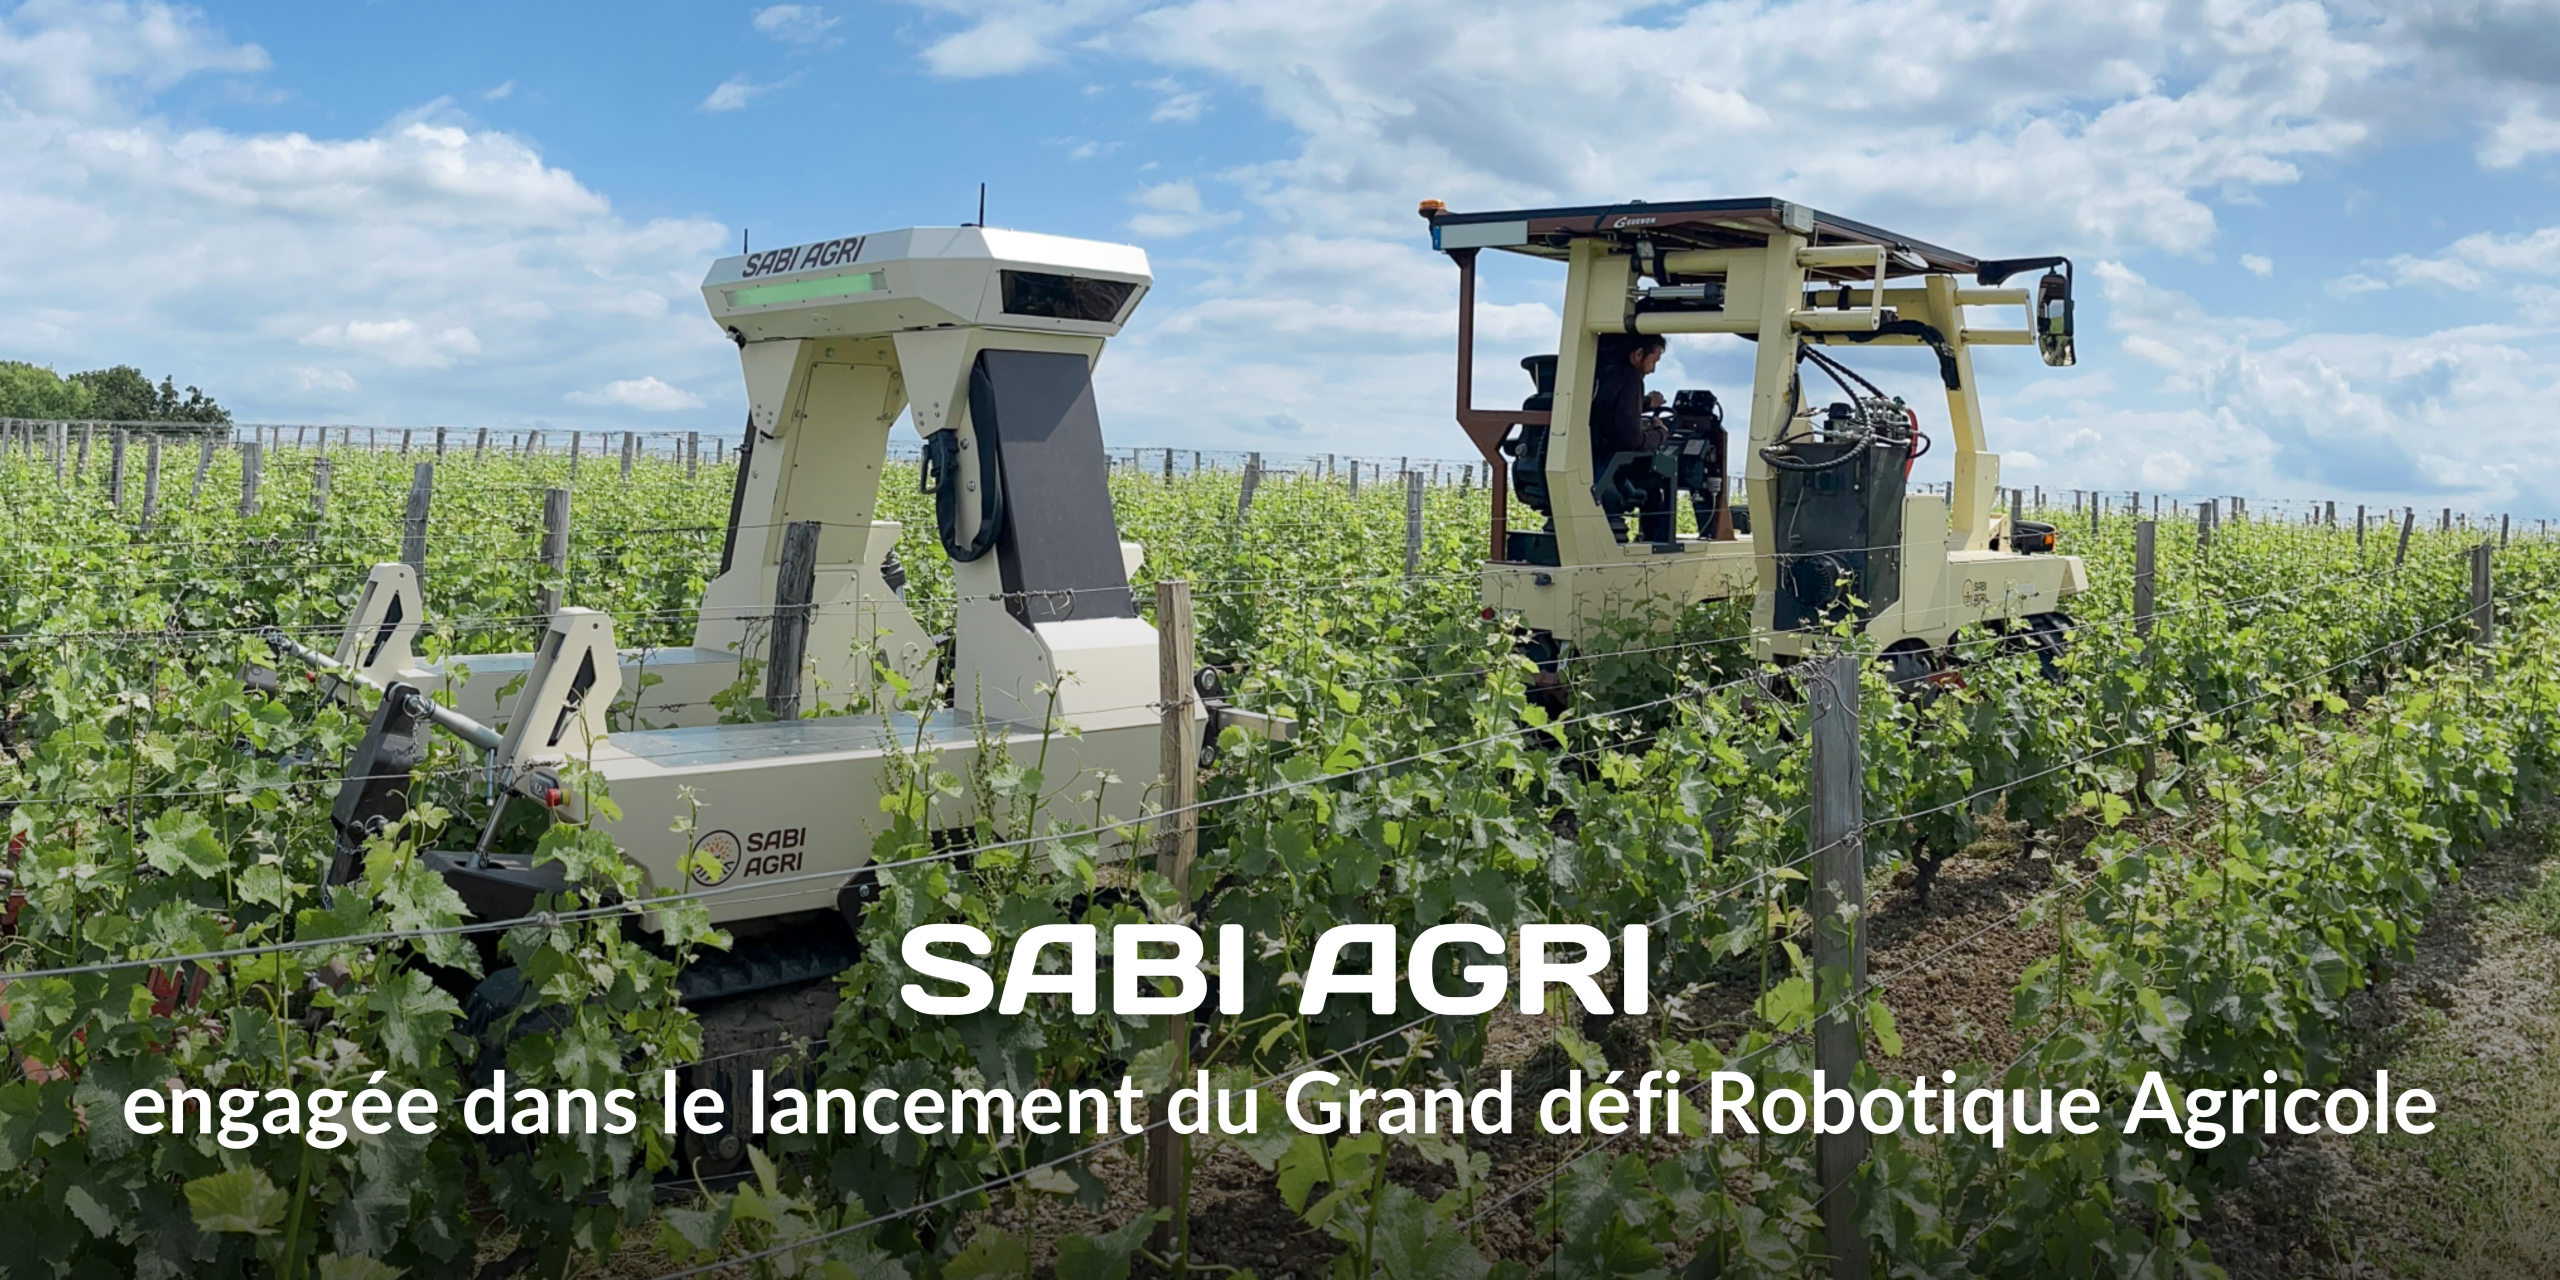 Read more about the article SABI AGRI committed to the Grand défi Robotique Agricole